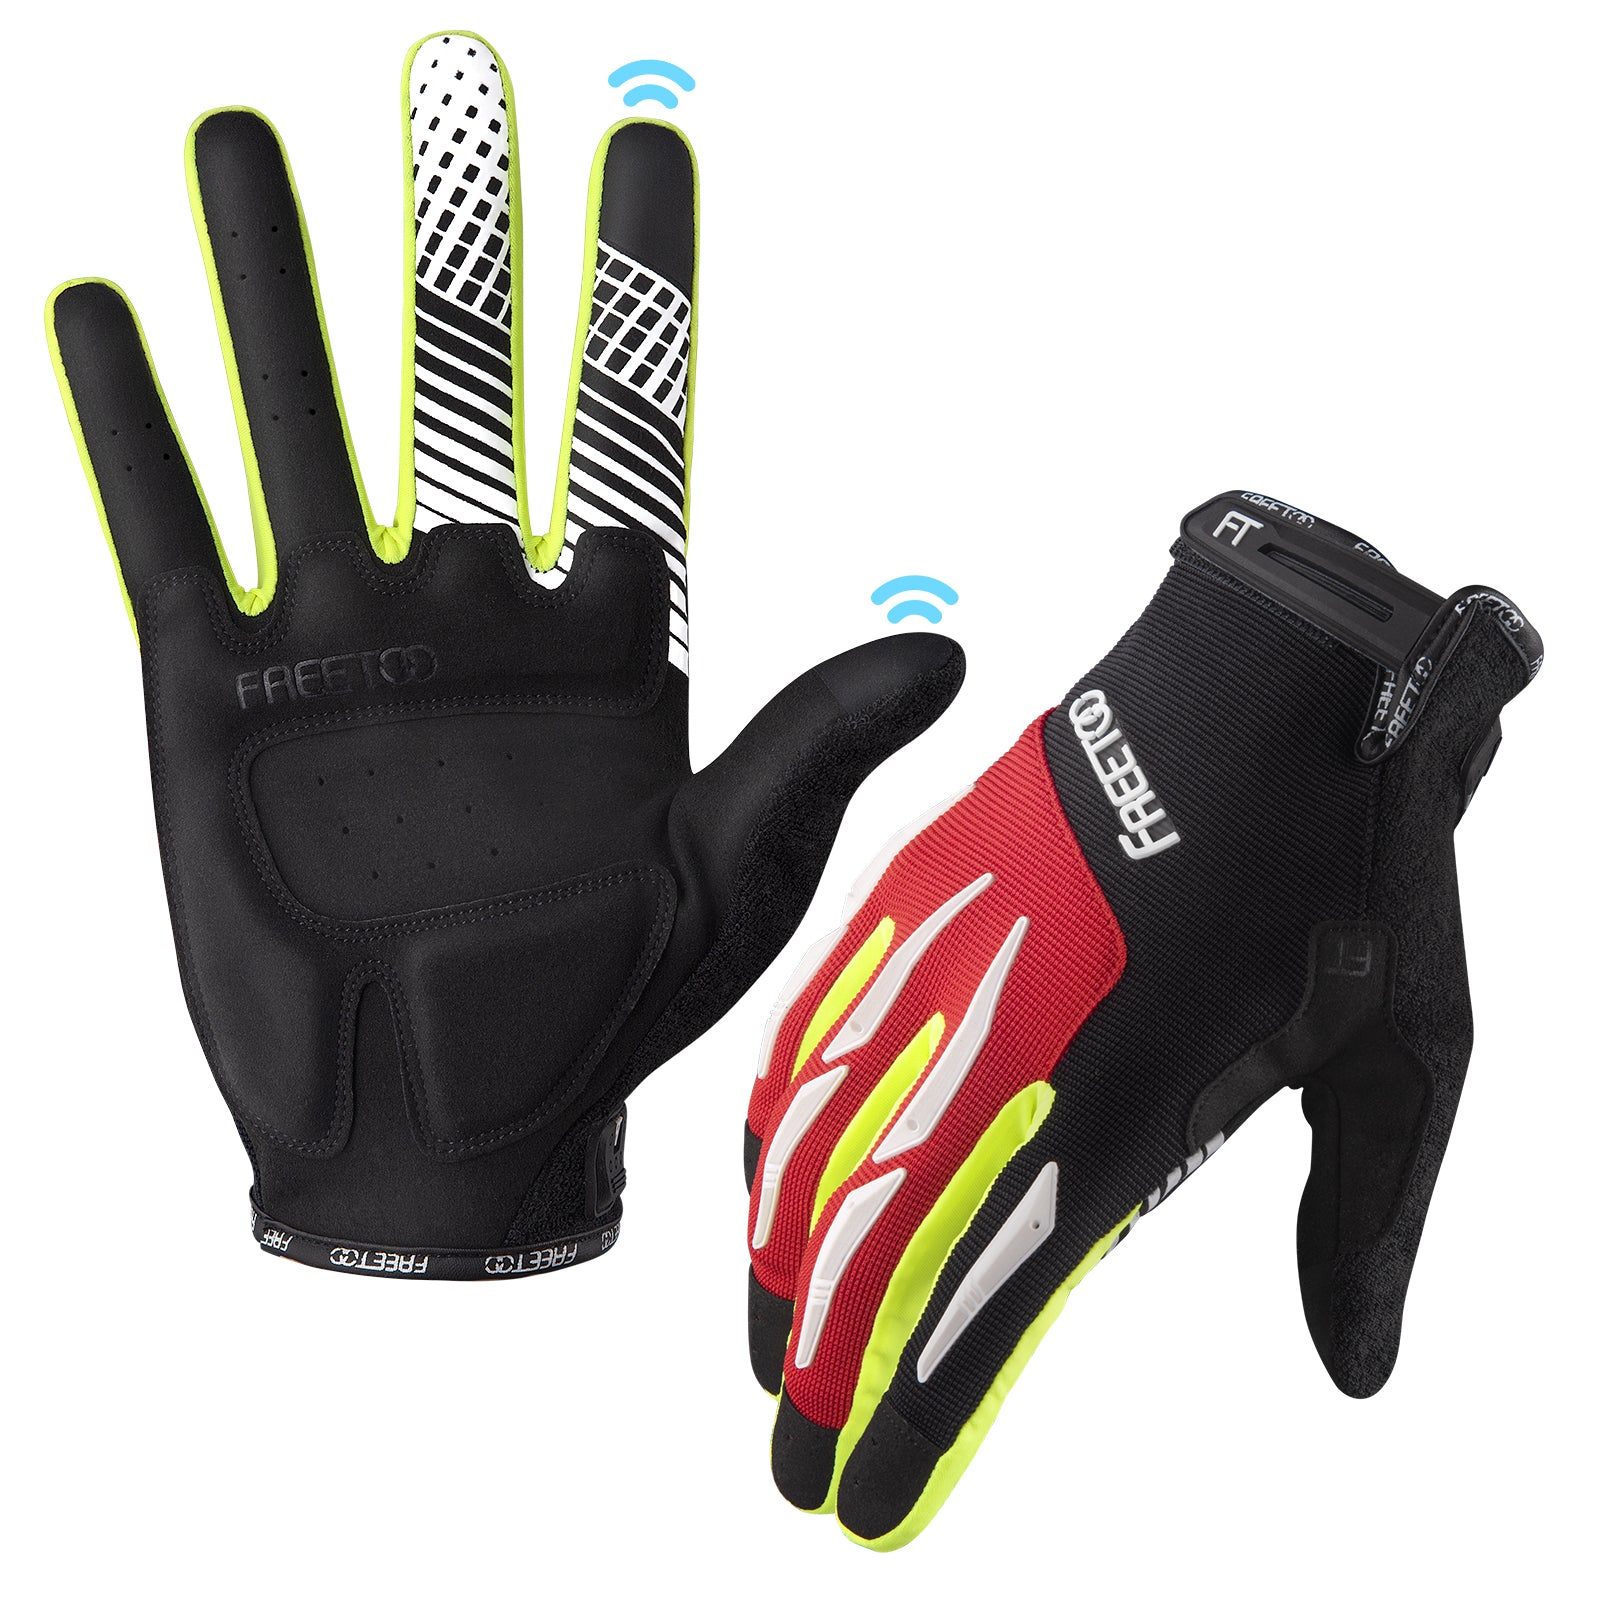 FREETOO® Cycling Gloves Touchscreen Non-Slip and Shock-Absorbing Cycling Gloves